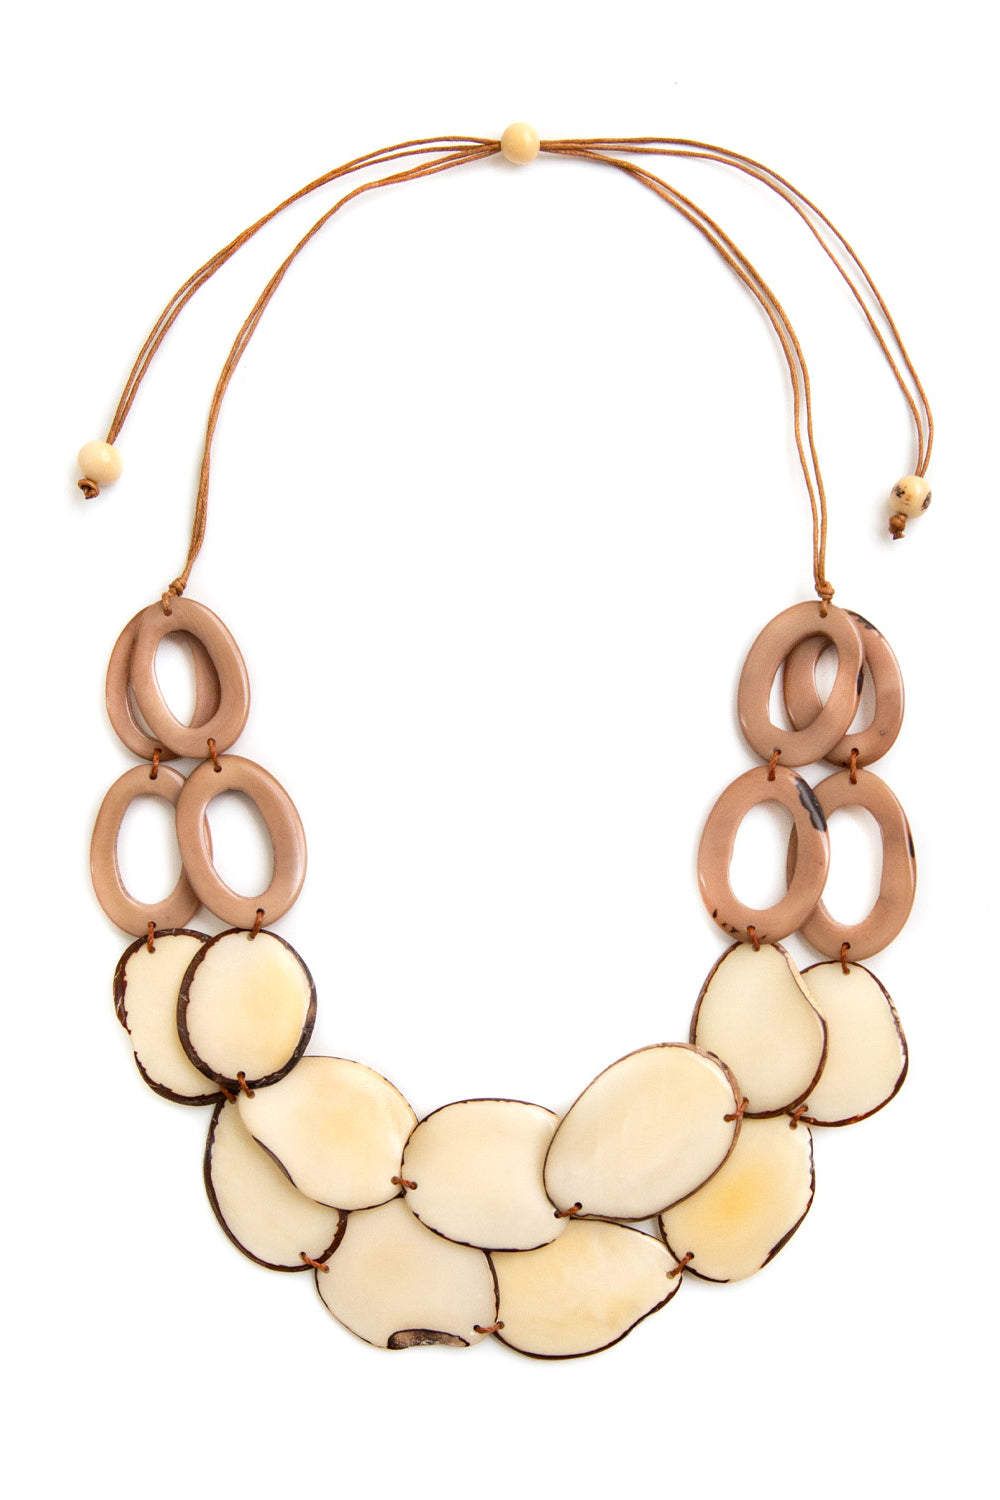 Organic Tagua Jewelry (SC1711) Africa Necklace, two strand chunky necklace with brown and cream tagua nut slice beads